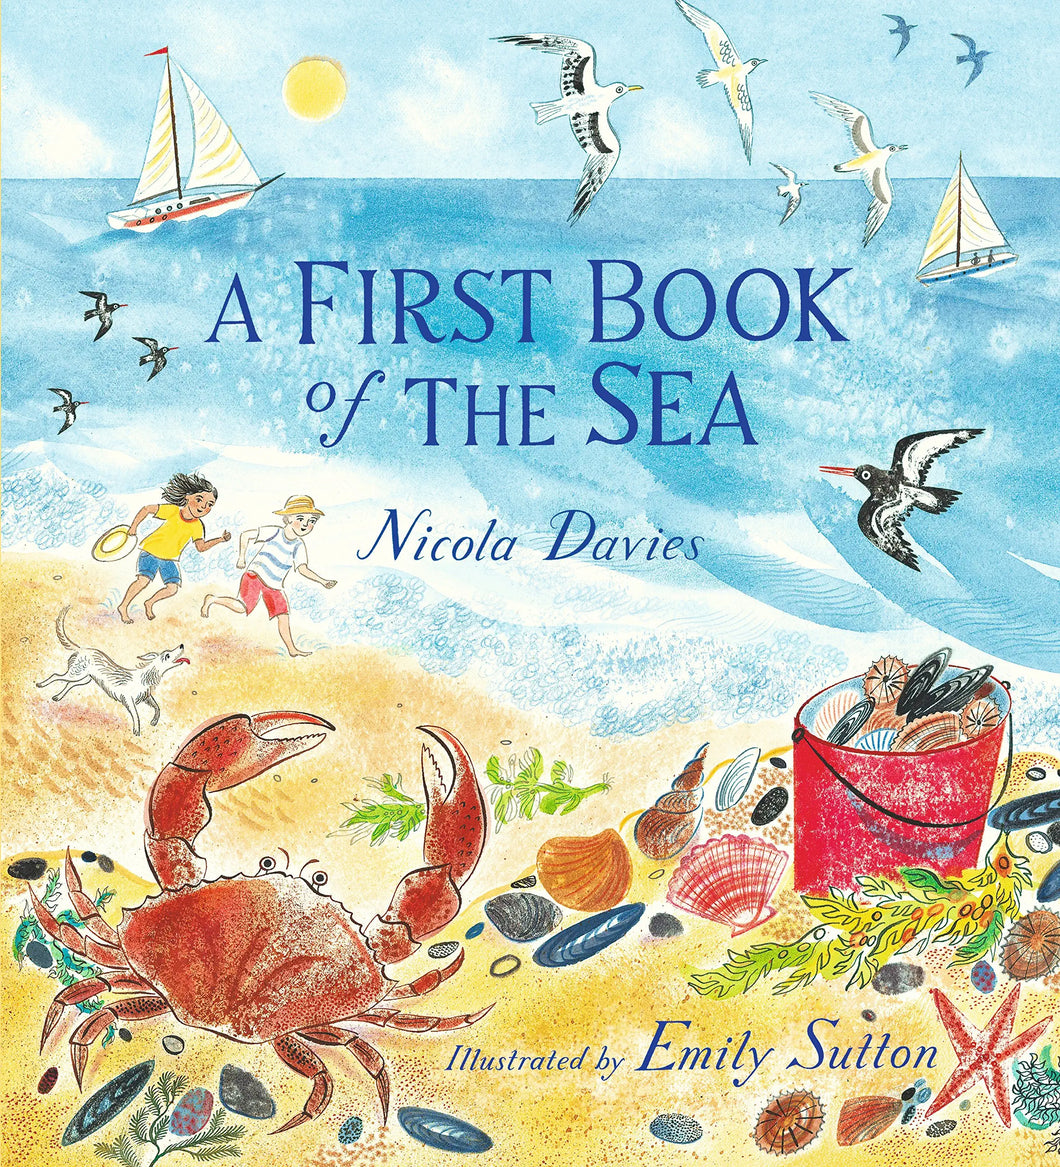 FIRST BOOK OF THE SEA